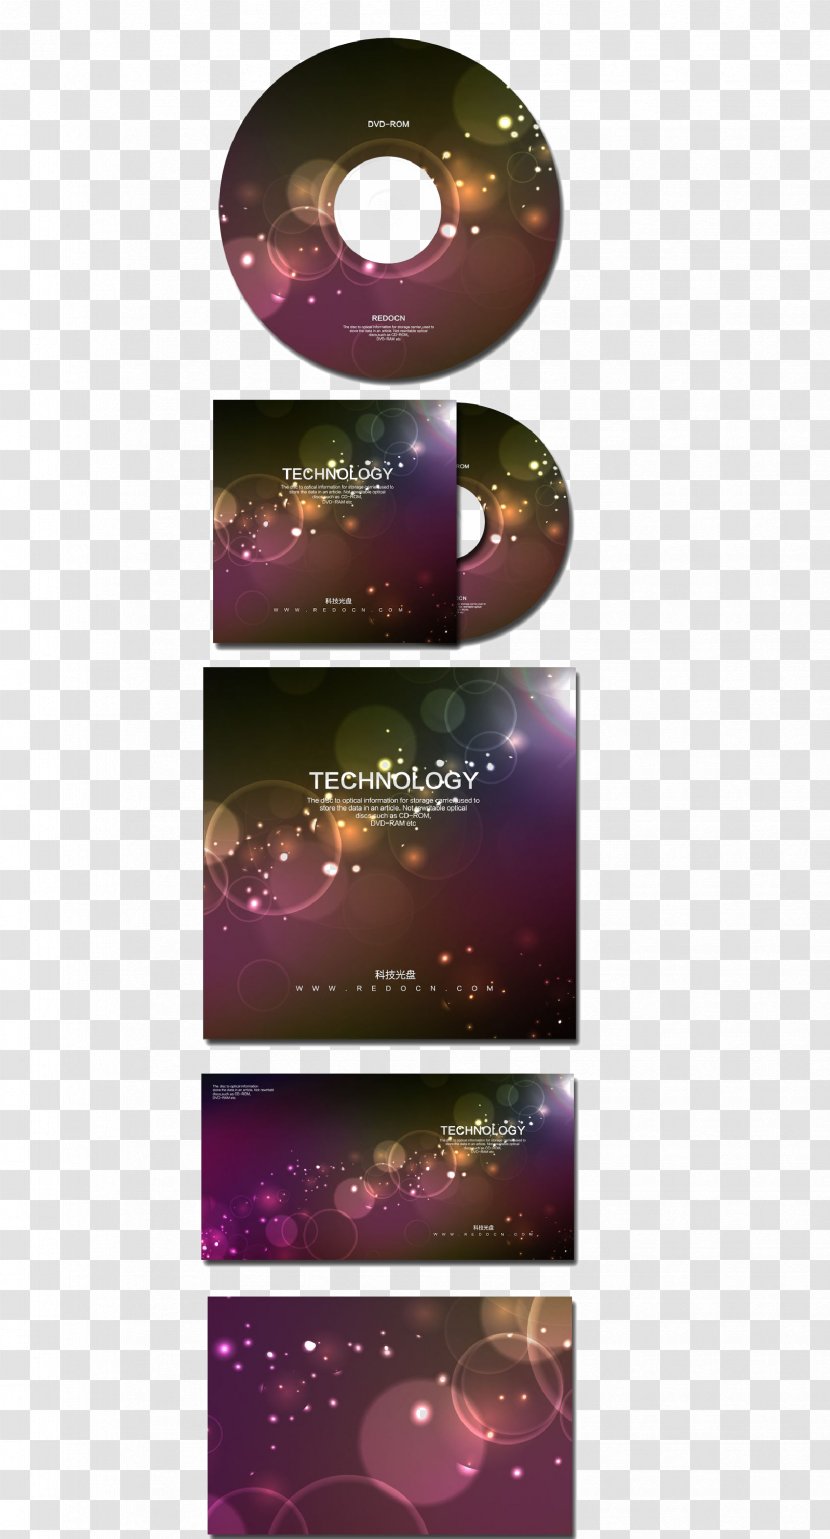 Template Compact Disc Optical Purple - Text - Free Buckle Creative CD Packaging Transparent PNG